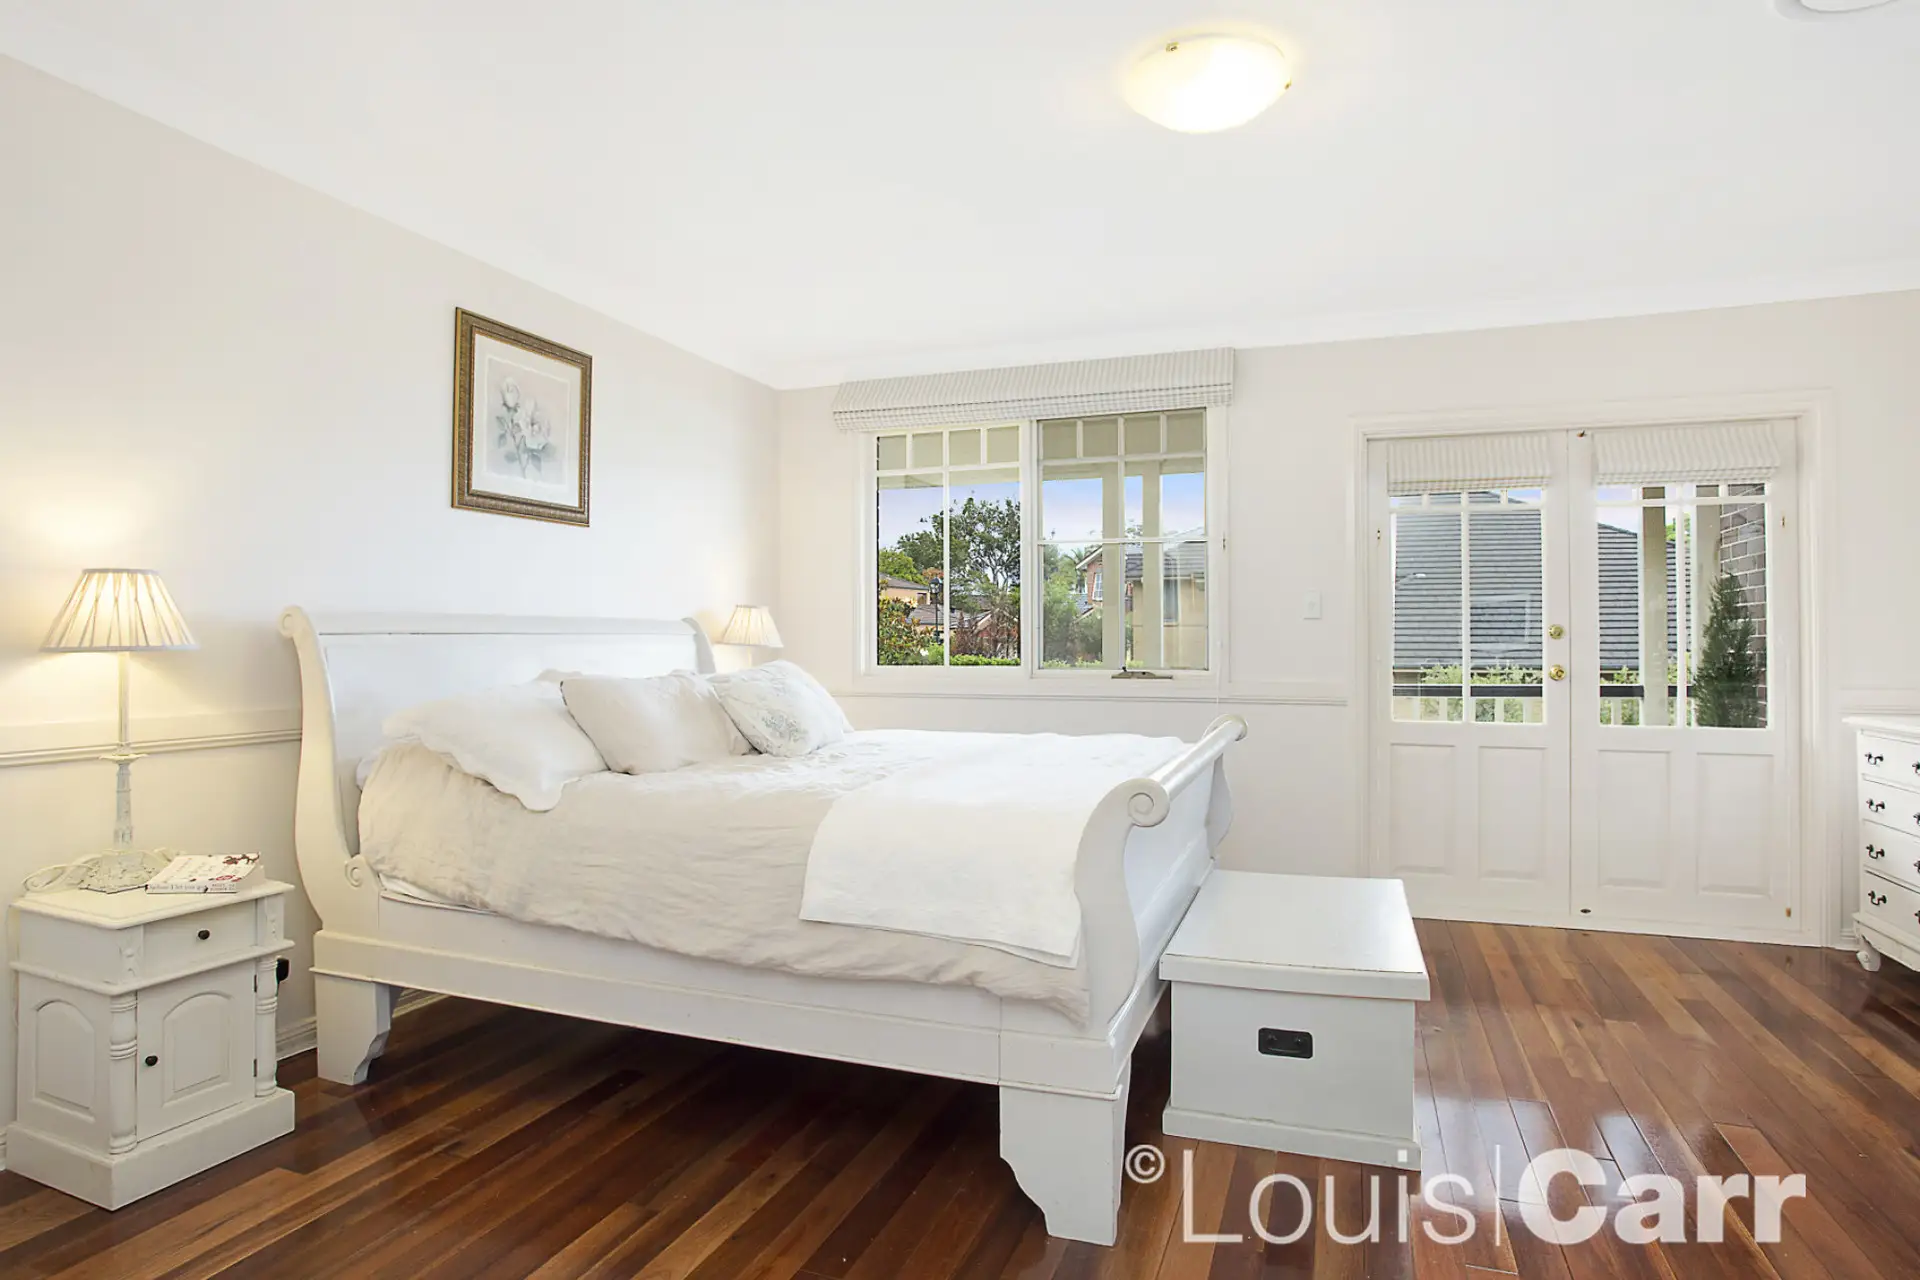 Photo #6: 17 George Muir Close, Baulkham Hills - Sold by Louis Carr Real Estate